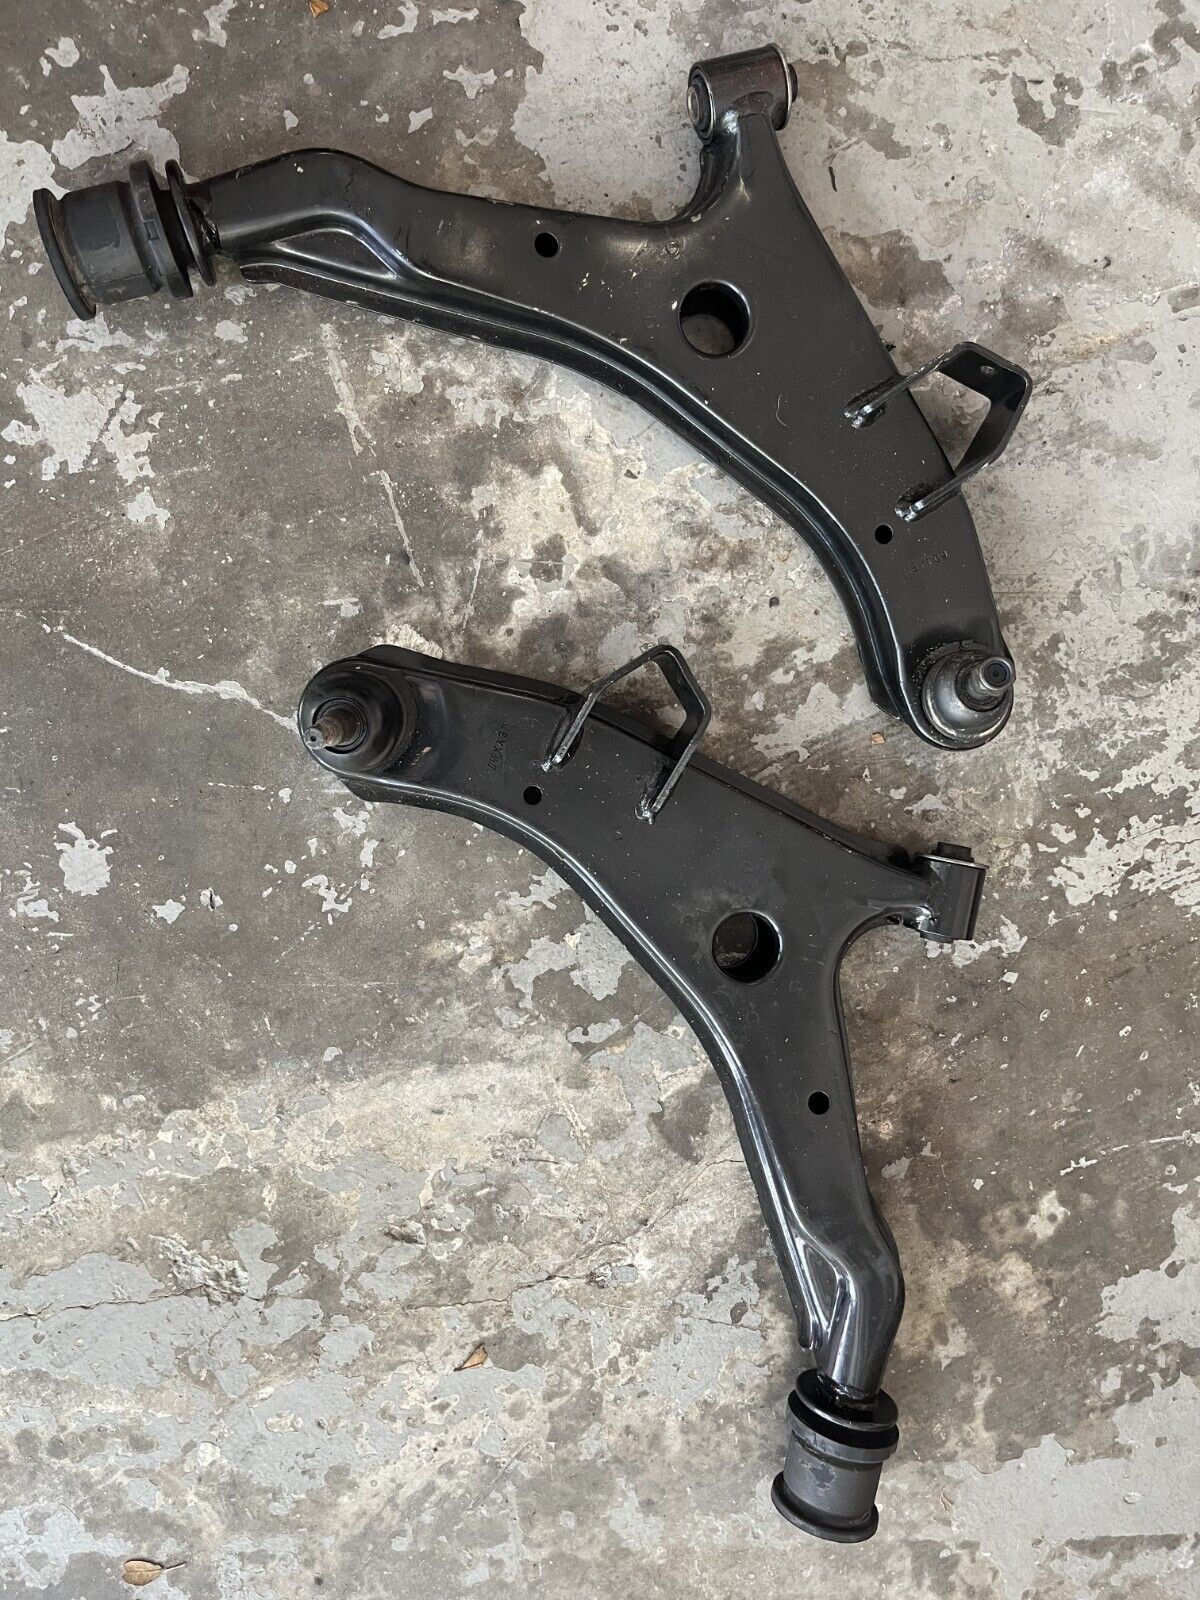 91-93 MITSUBISHI 3000GT Vr4 FRONT LOWER CONTROL ARMS